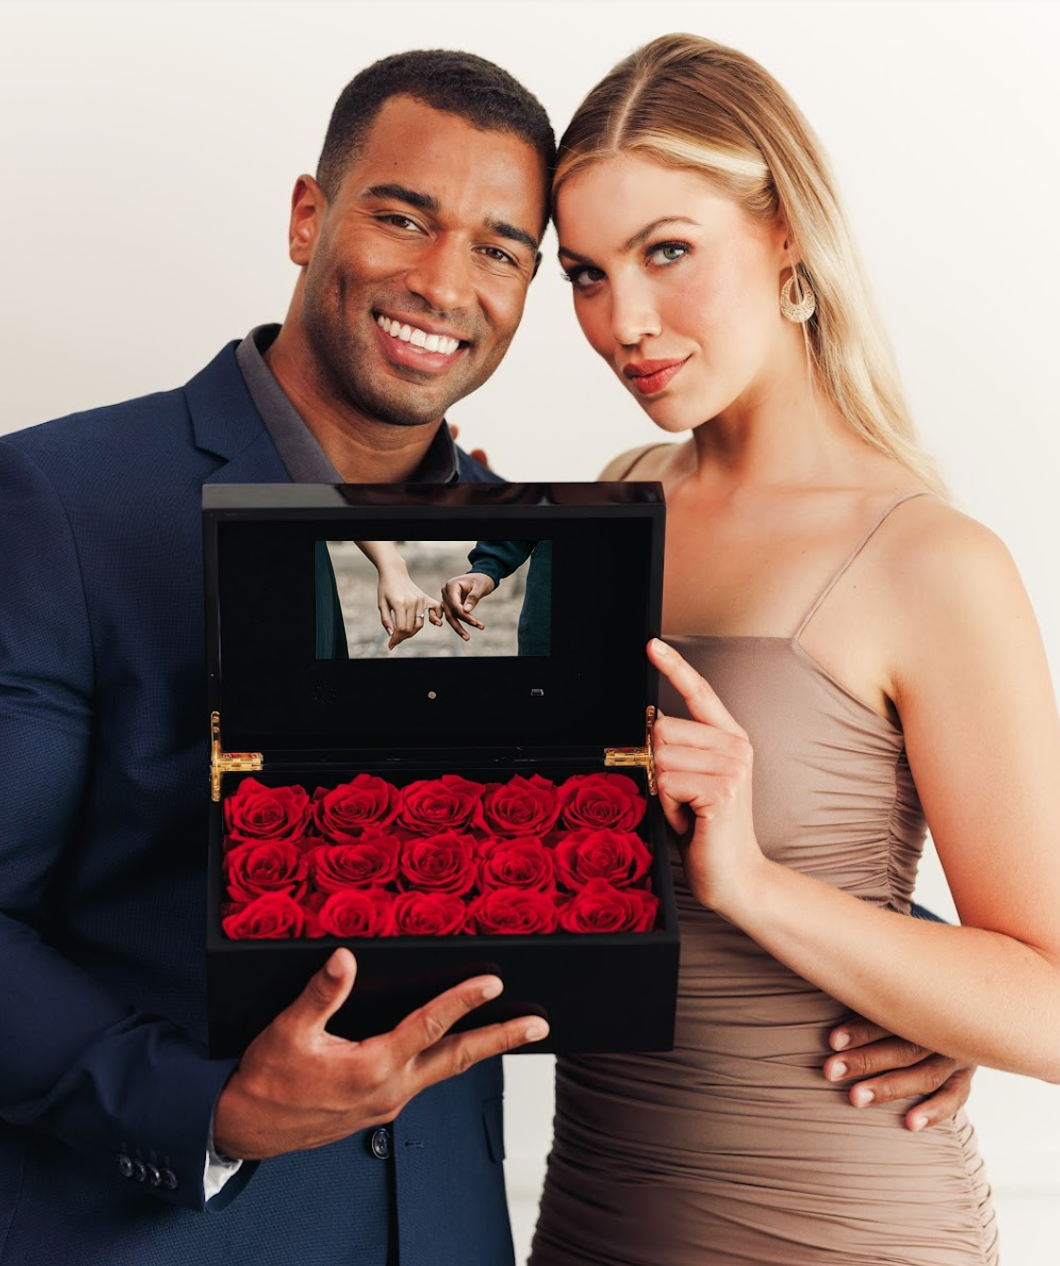 Verona Roses | 15 Preserved Roses Luxury Box with Personalized Video Screen